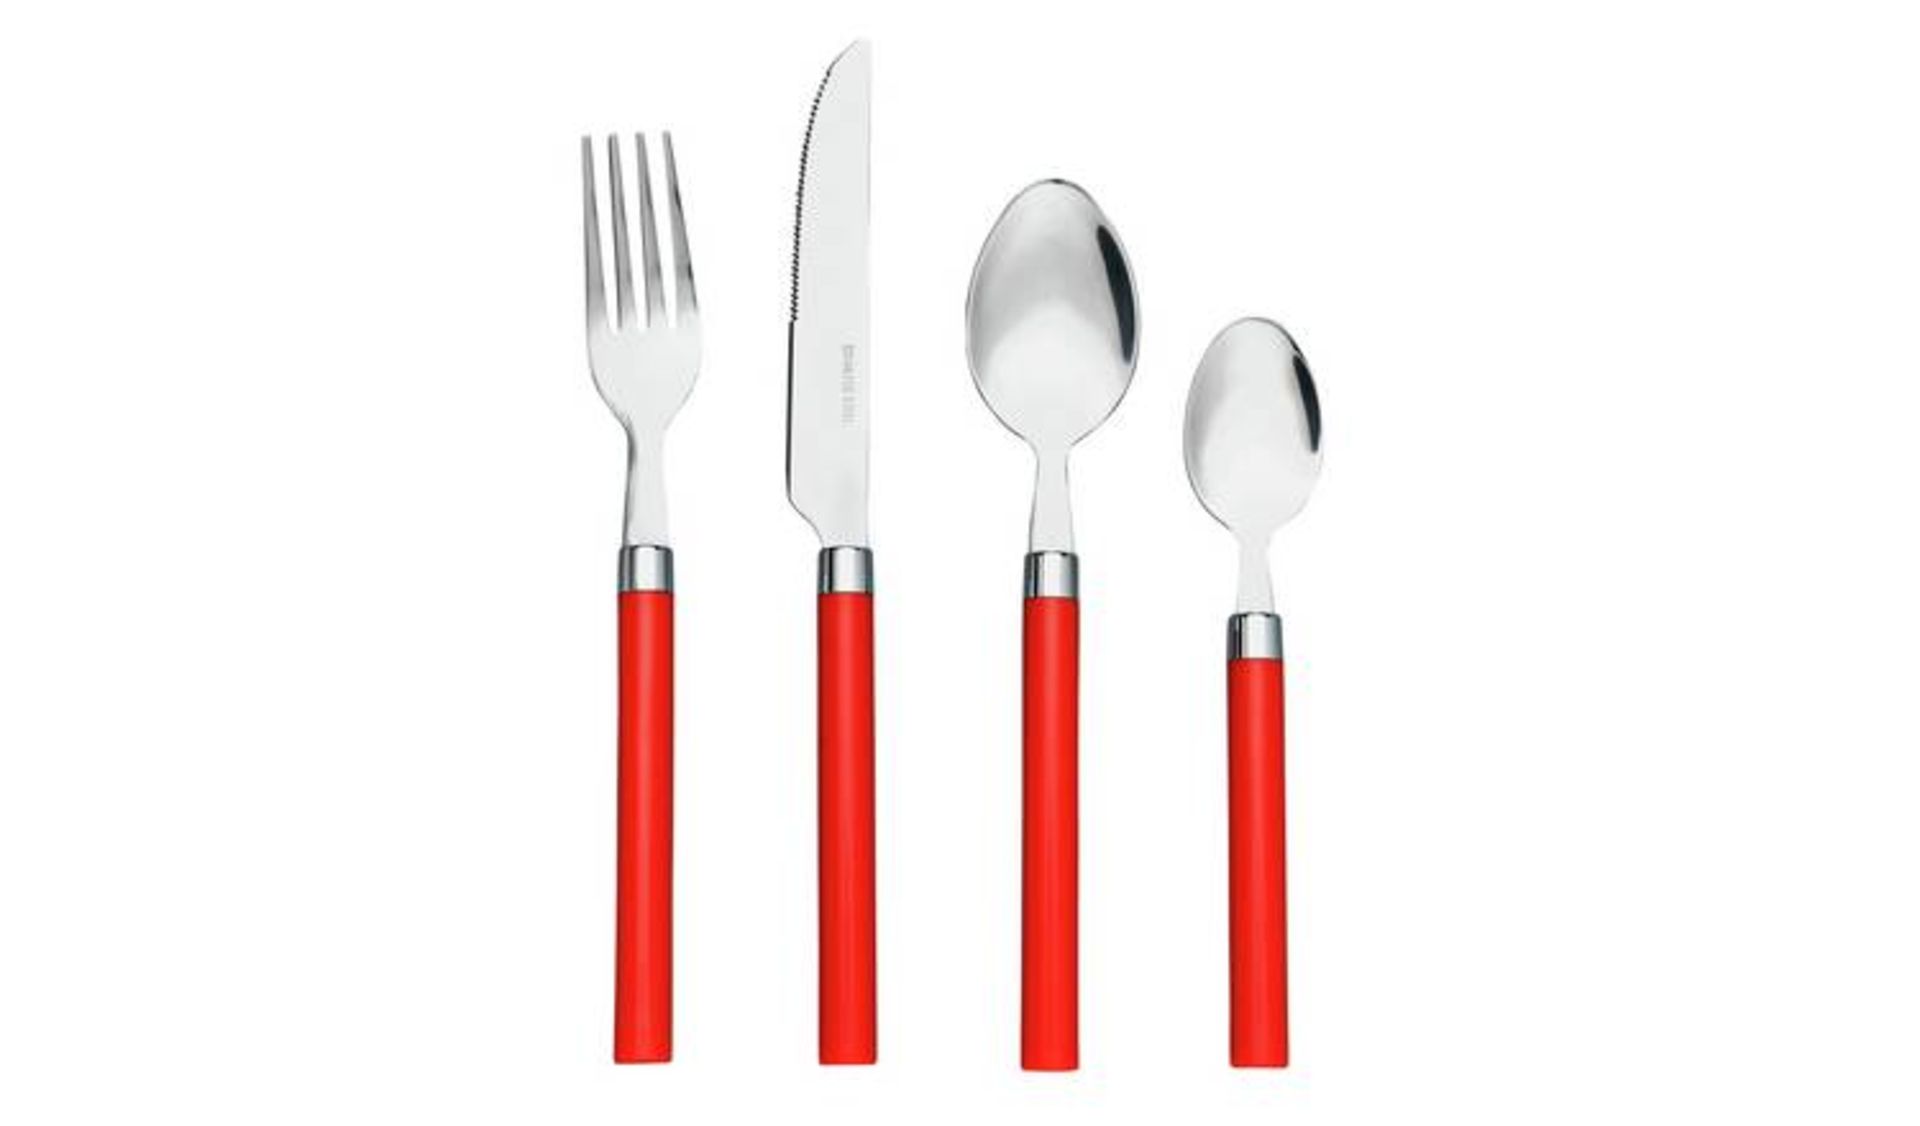 6 X BRAND NEW 16 PIECE LUXURY CUTLERY SETS RED HANDLE R5-3